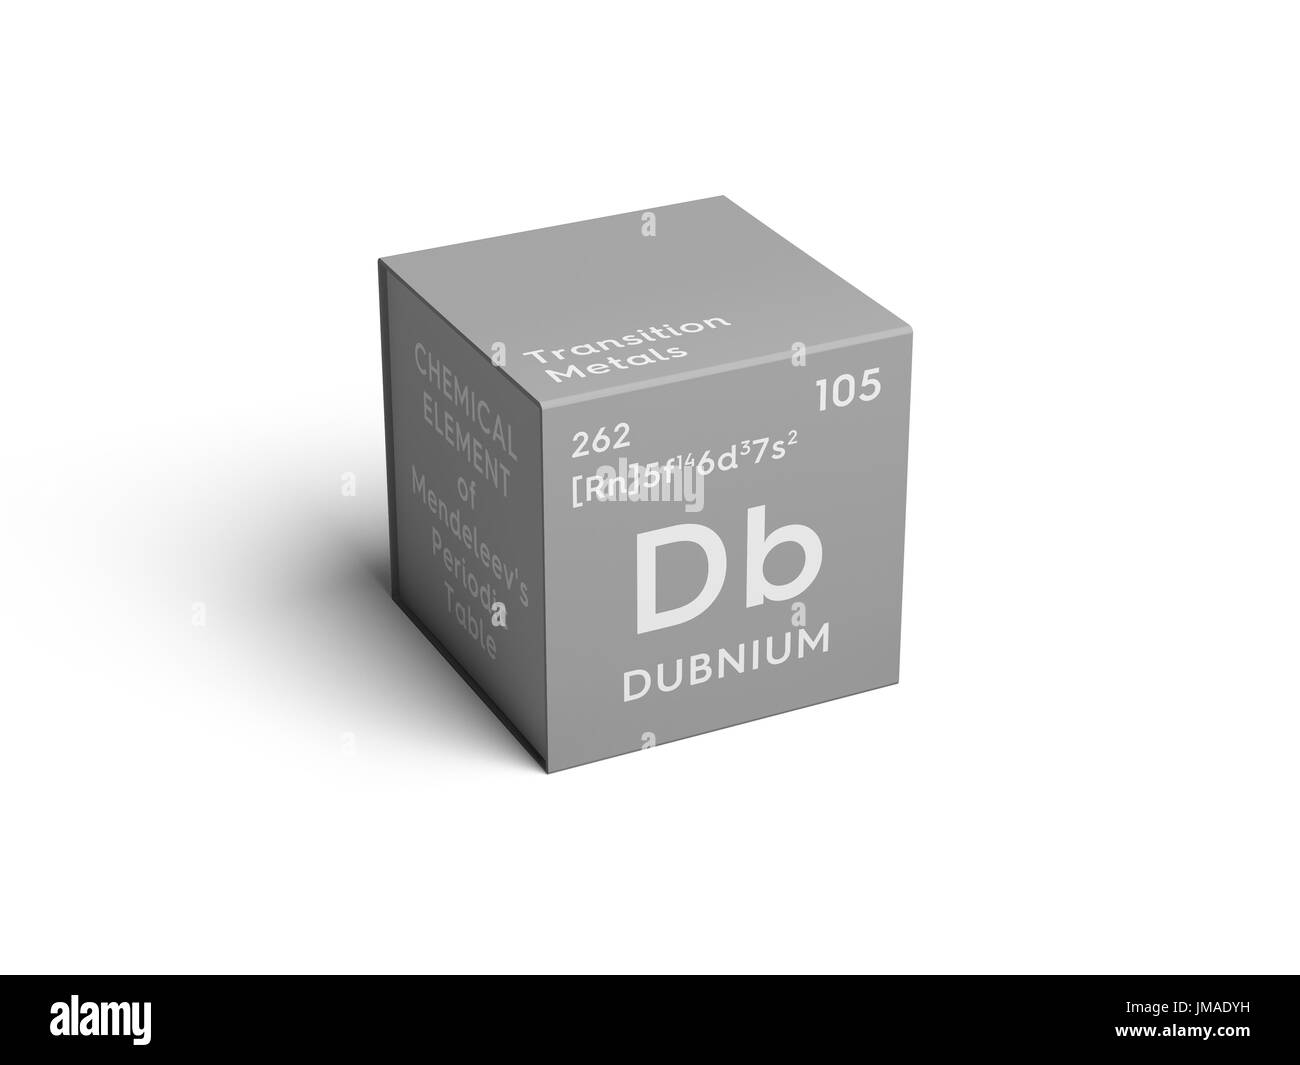 Dubnium. Transition metals. Chemical Element of Mendeleev's Periodic Table. Dubnium in square cube creative concept. Stock Photo